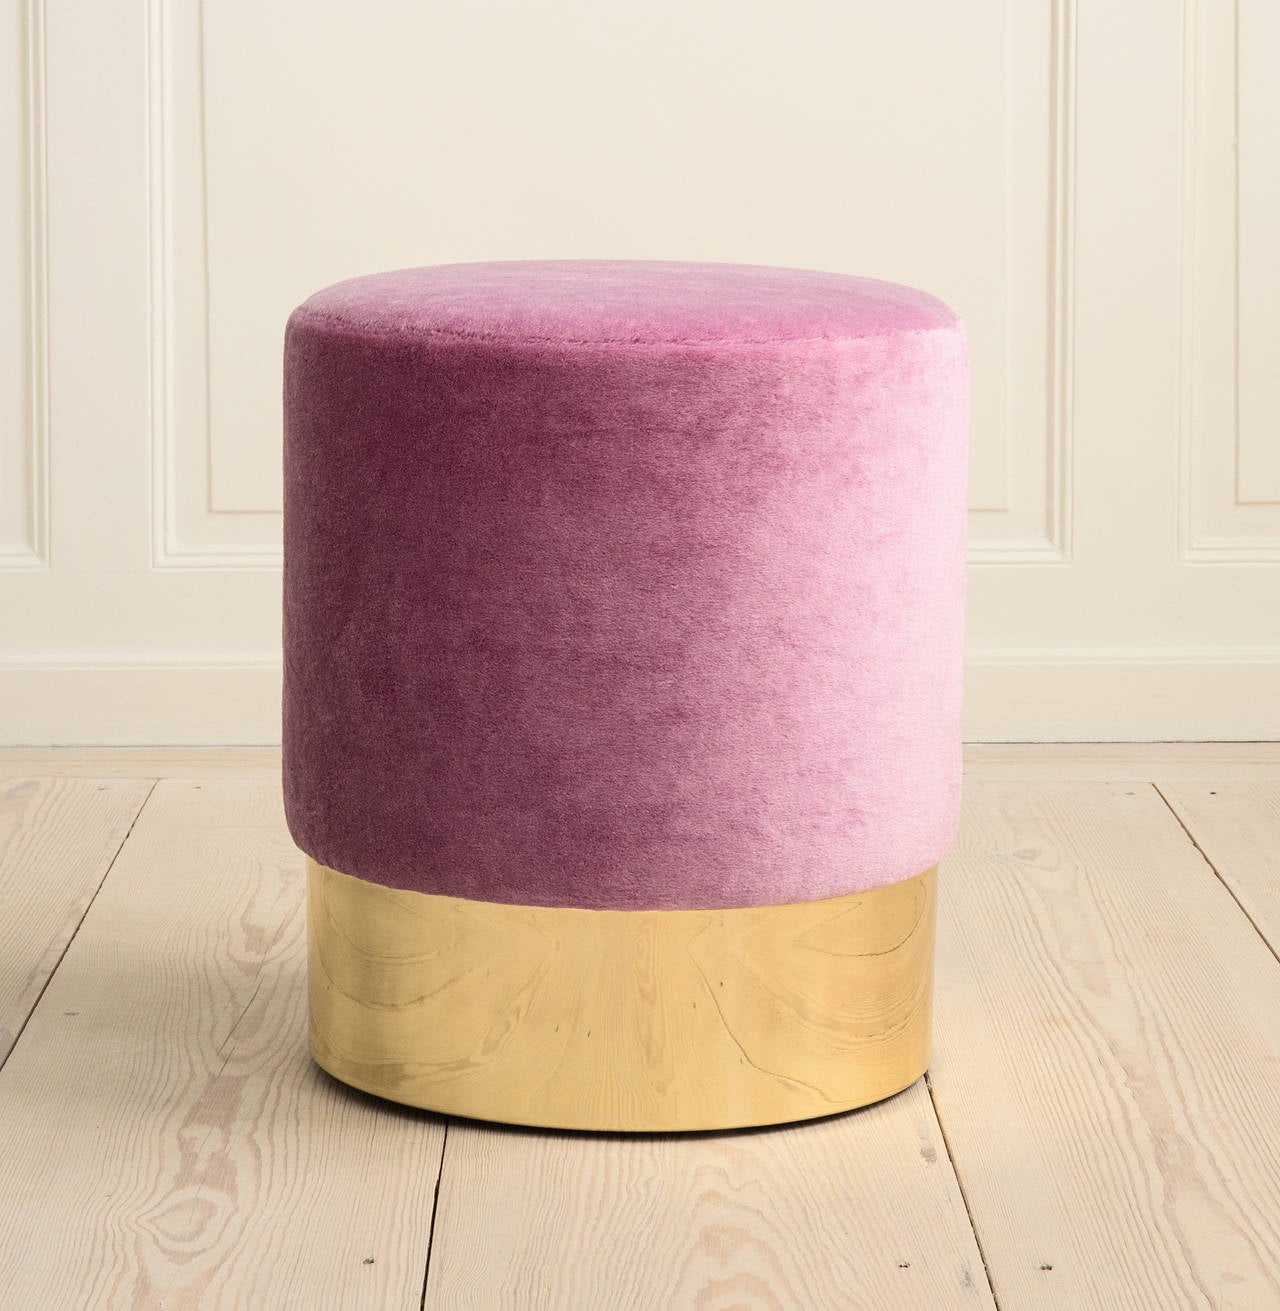 Azucena stool upholstered in Raf Simons Kvadrat textile for the apartment. Brass base. Designed by Luigi Caccia, Dominioni in 1963. Contemporary production by Azucena.